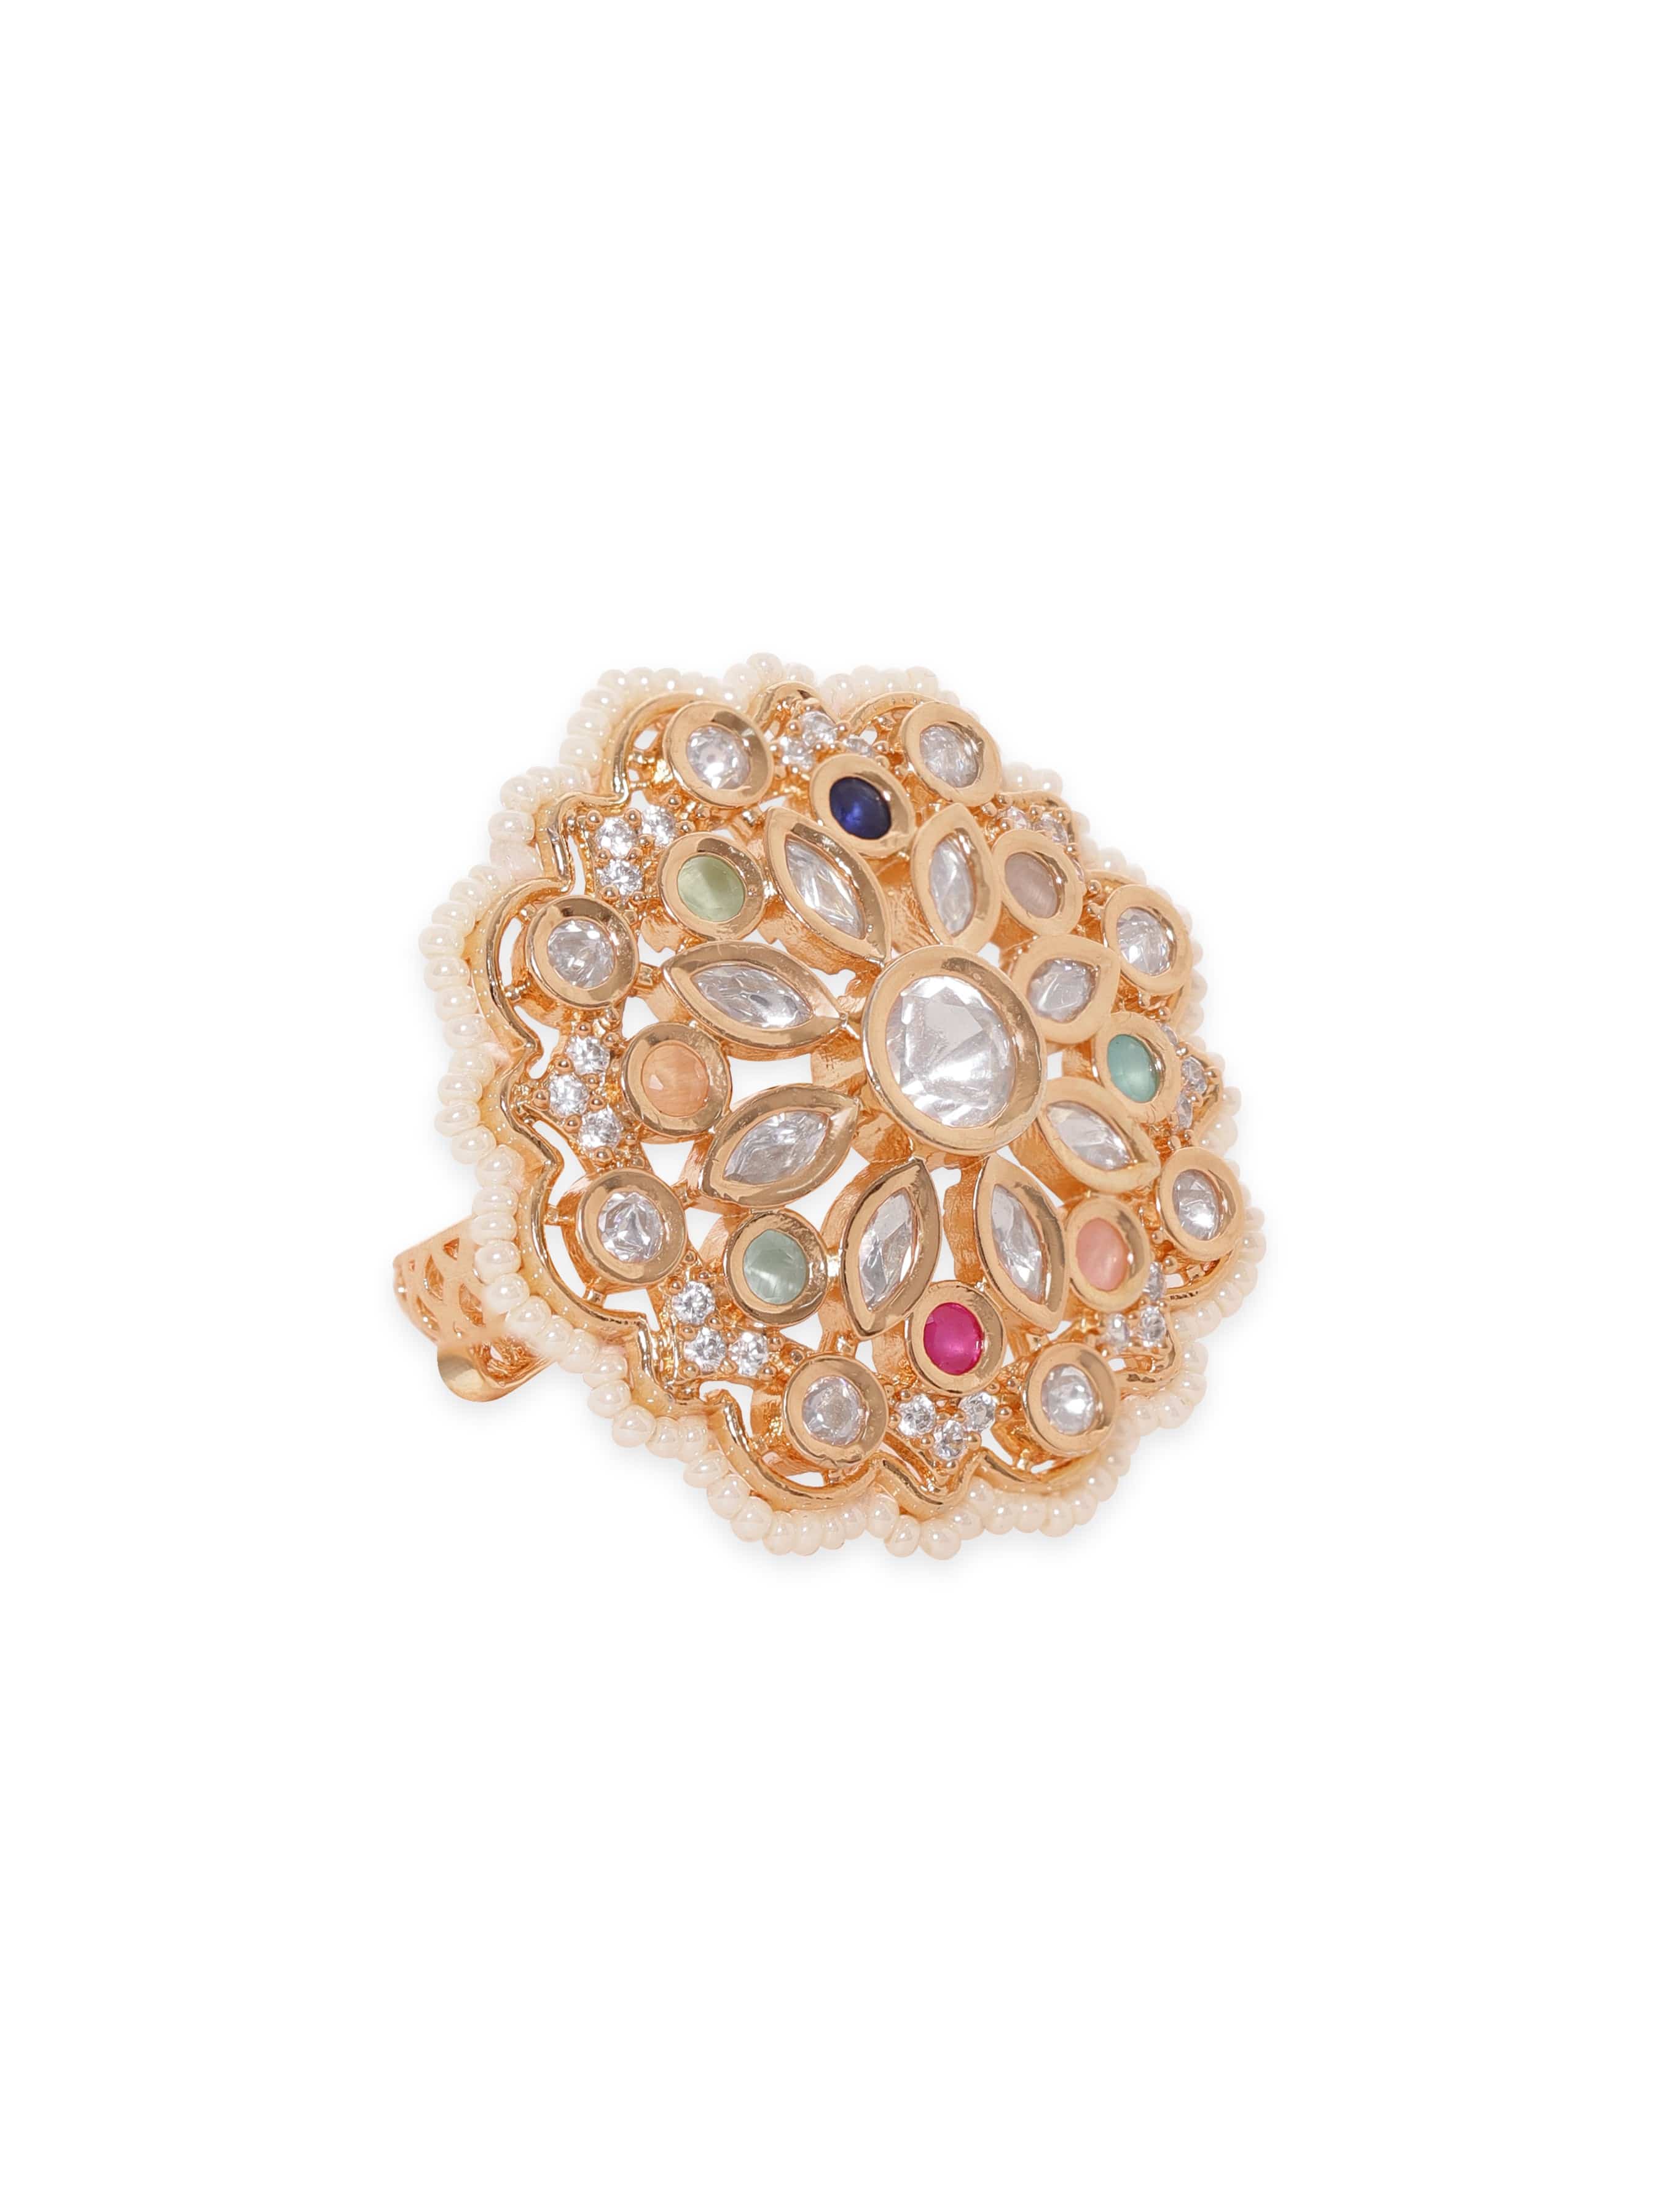 Stylish Gold Plated Ruby Stones Floral Finger Ring Online|Kollam Supreme